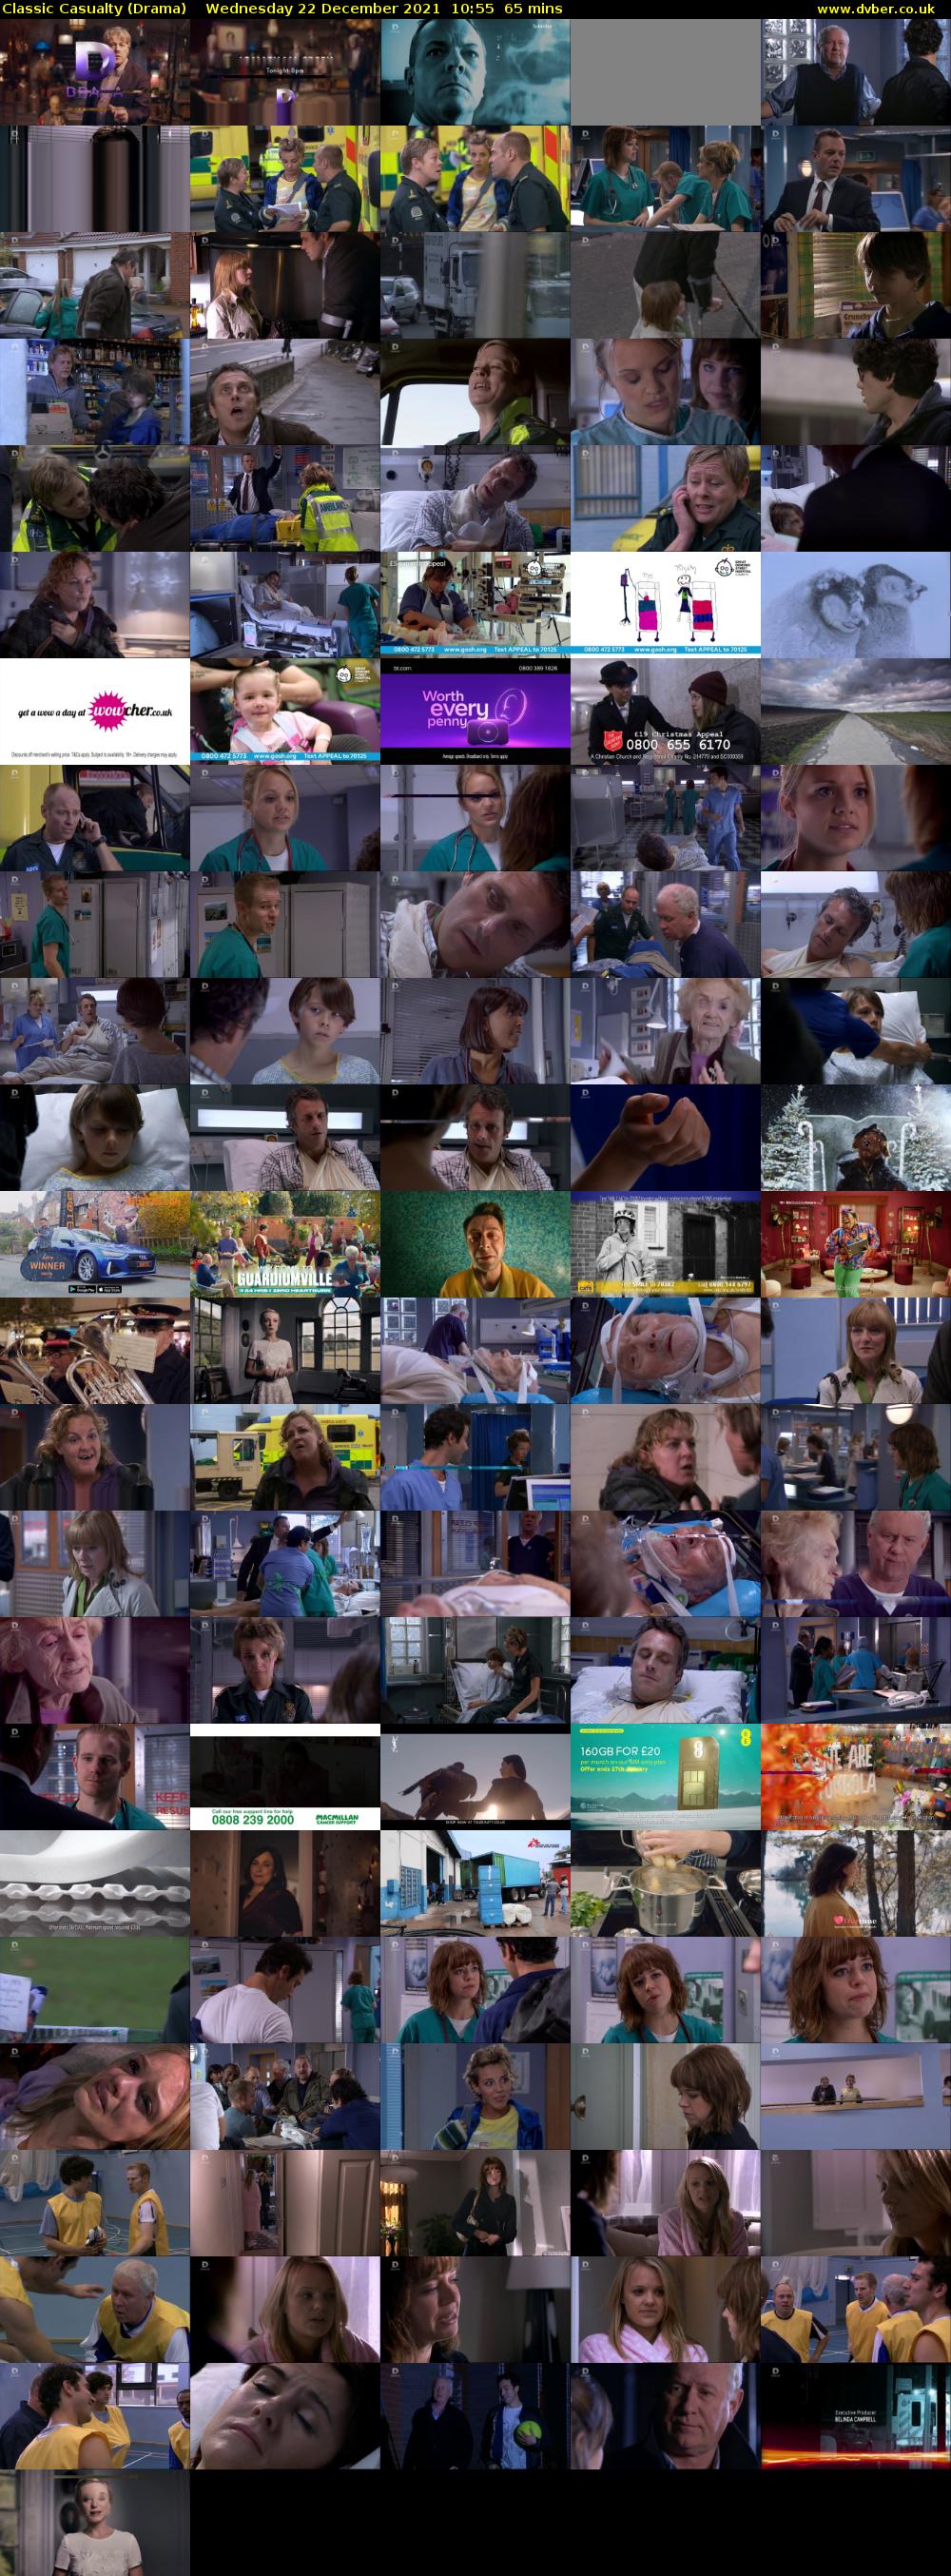 Classic Casualty (Drama) Wednesday 22 December 2021 10:55 - 12:00